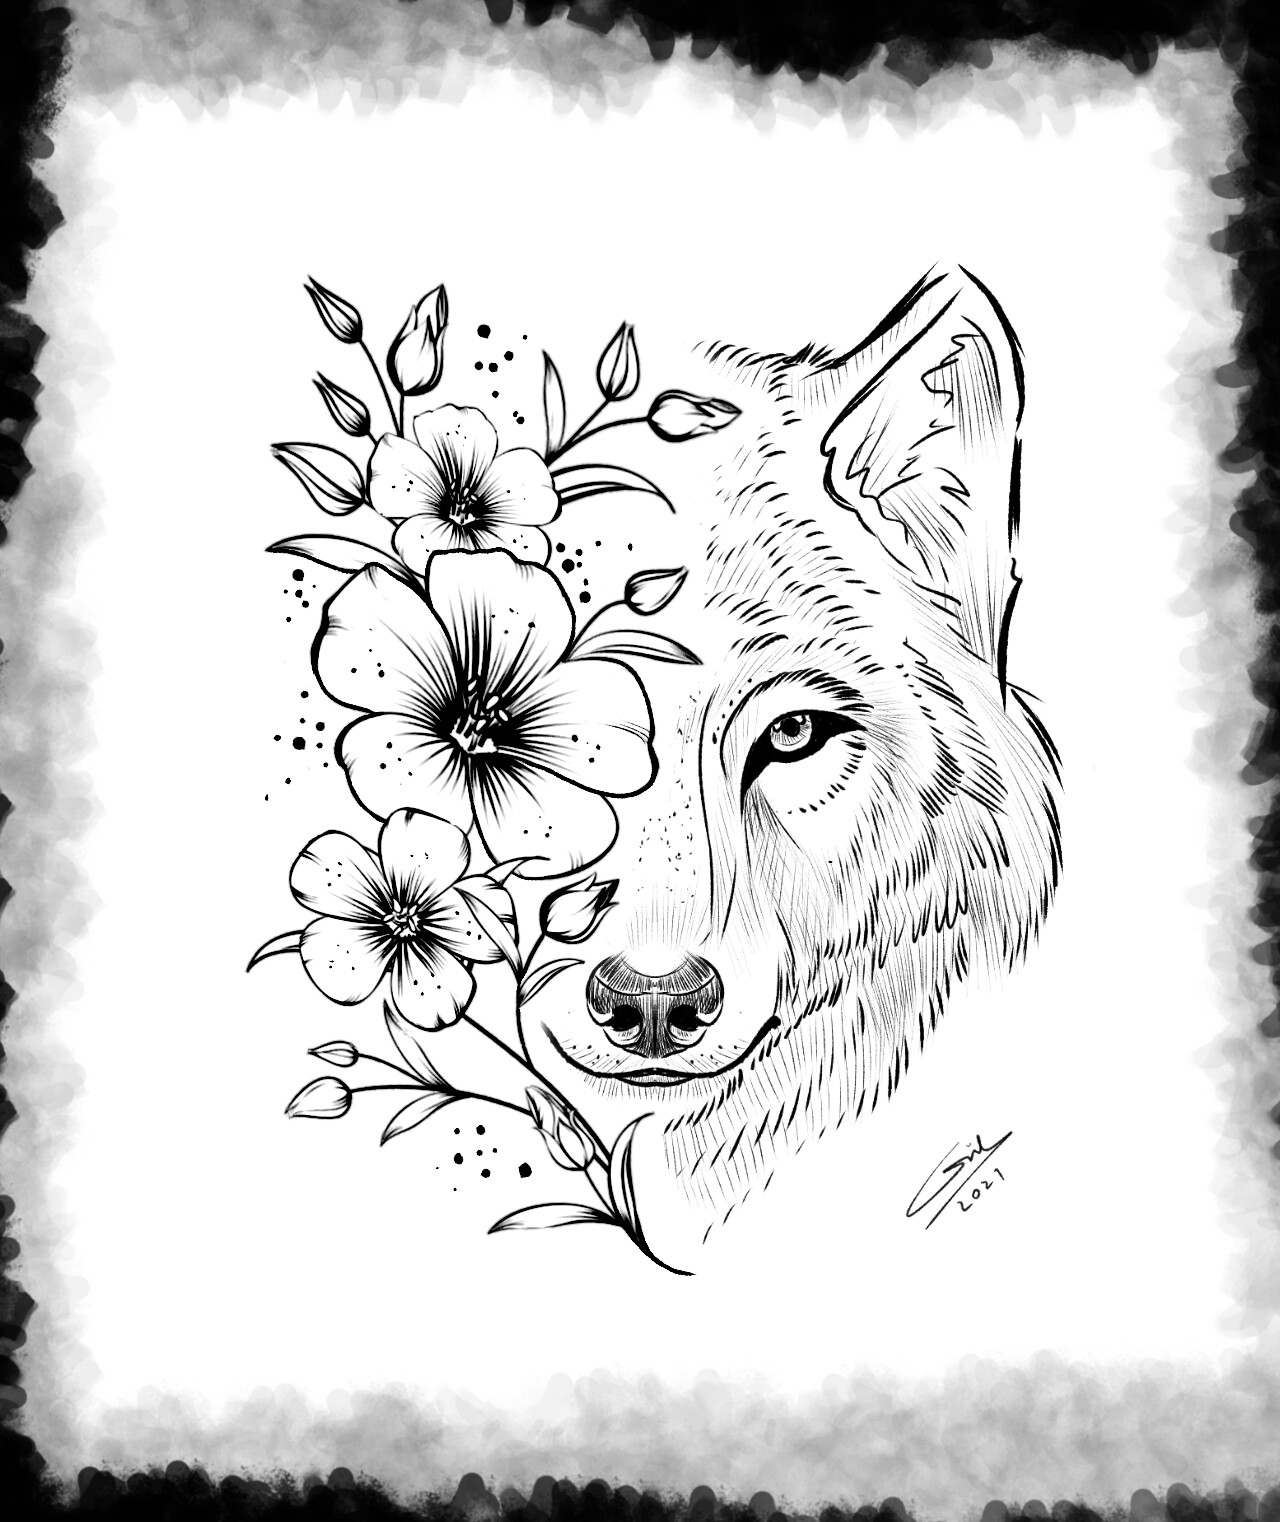 50 Great and Wonderful Tattoos Ideas and Designs of Wolf